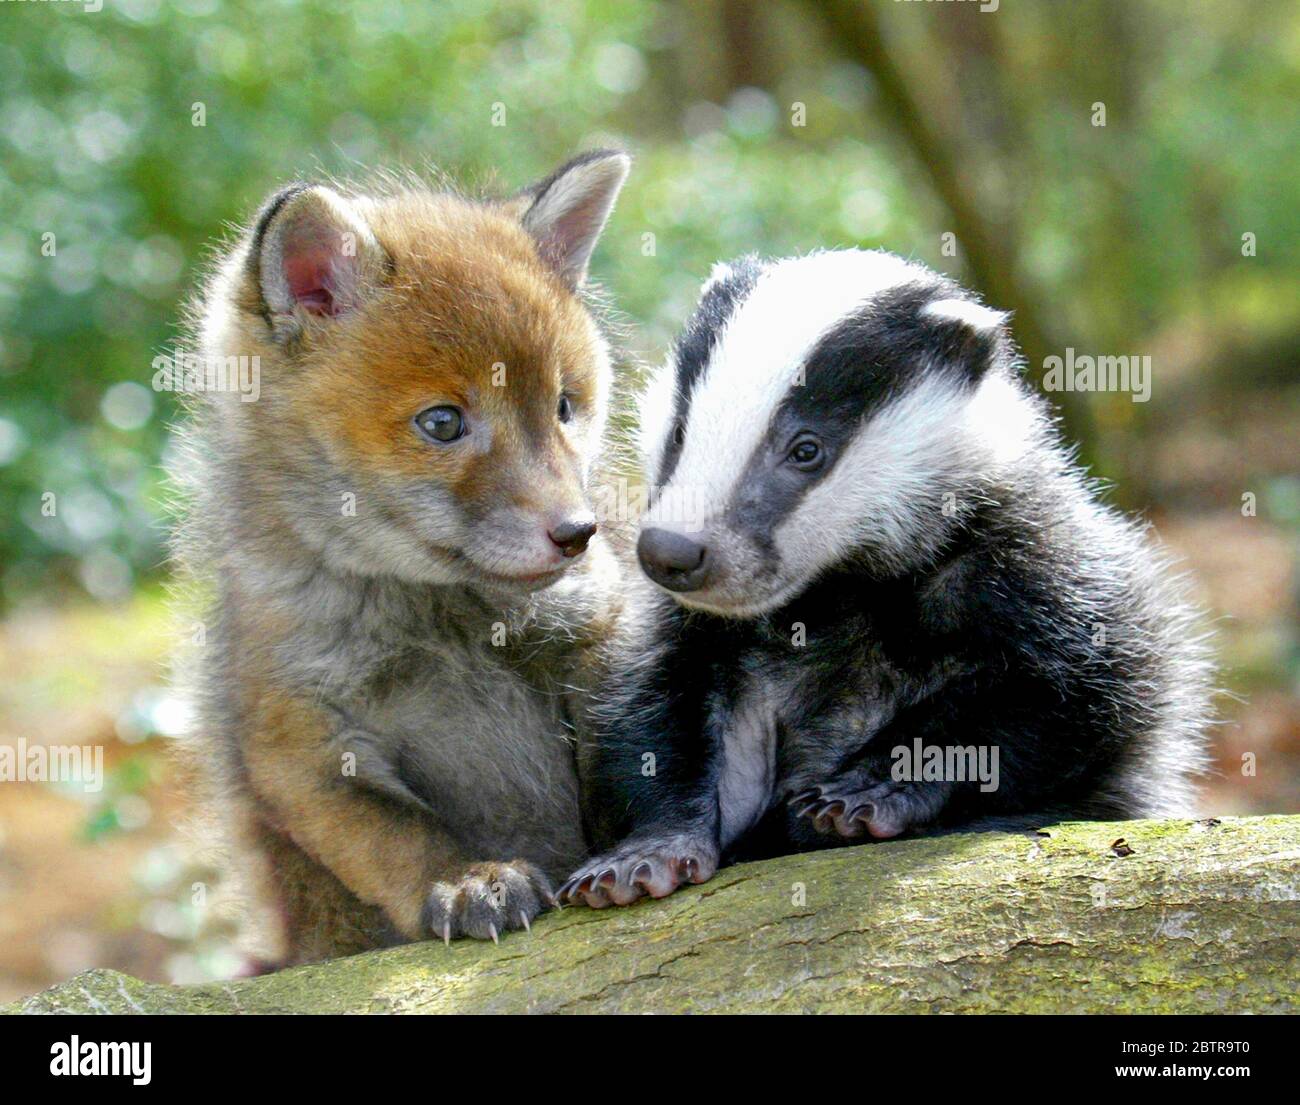 Badger cub and a fox cub in Surrey, England. The cute baby wild animals  became great friends whist recovering from illness Stock Photo - Alamy